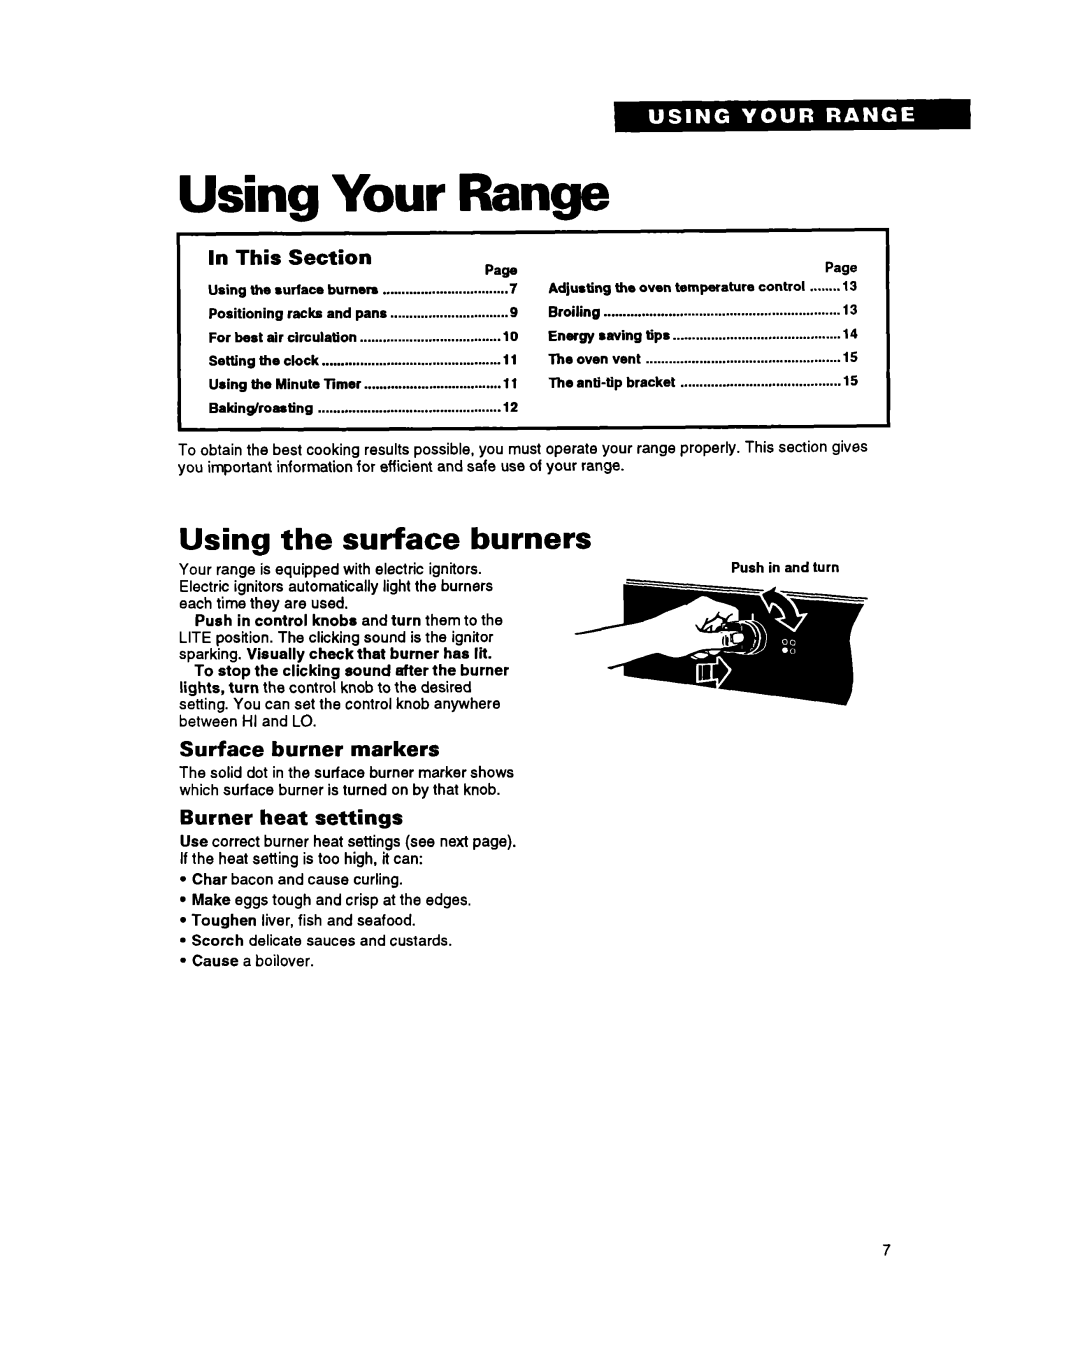 Whirlpool TGR51 Your, Range, Using the surface burners, This, Section, Surface burner markers, Burner heat settings 